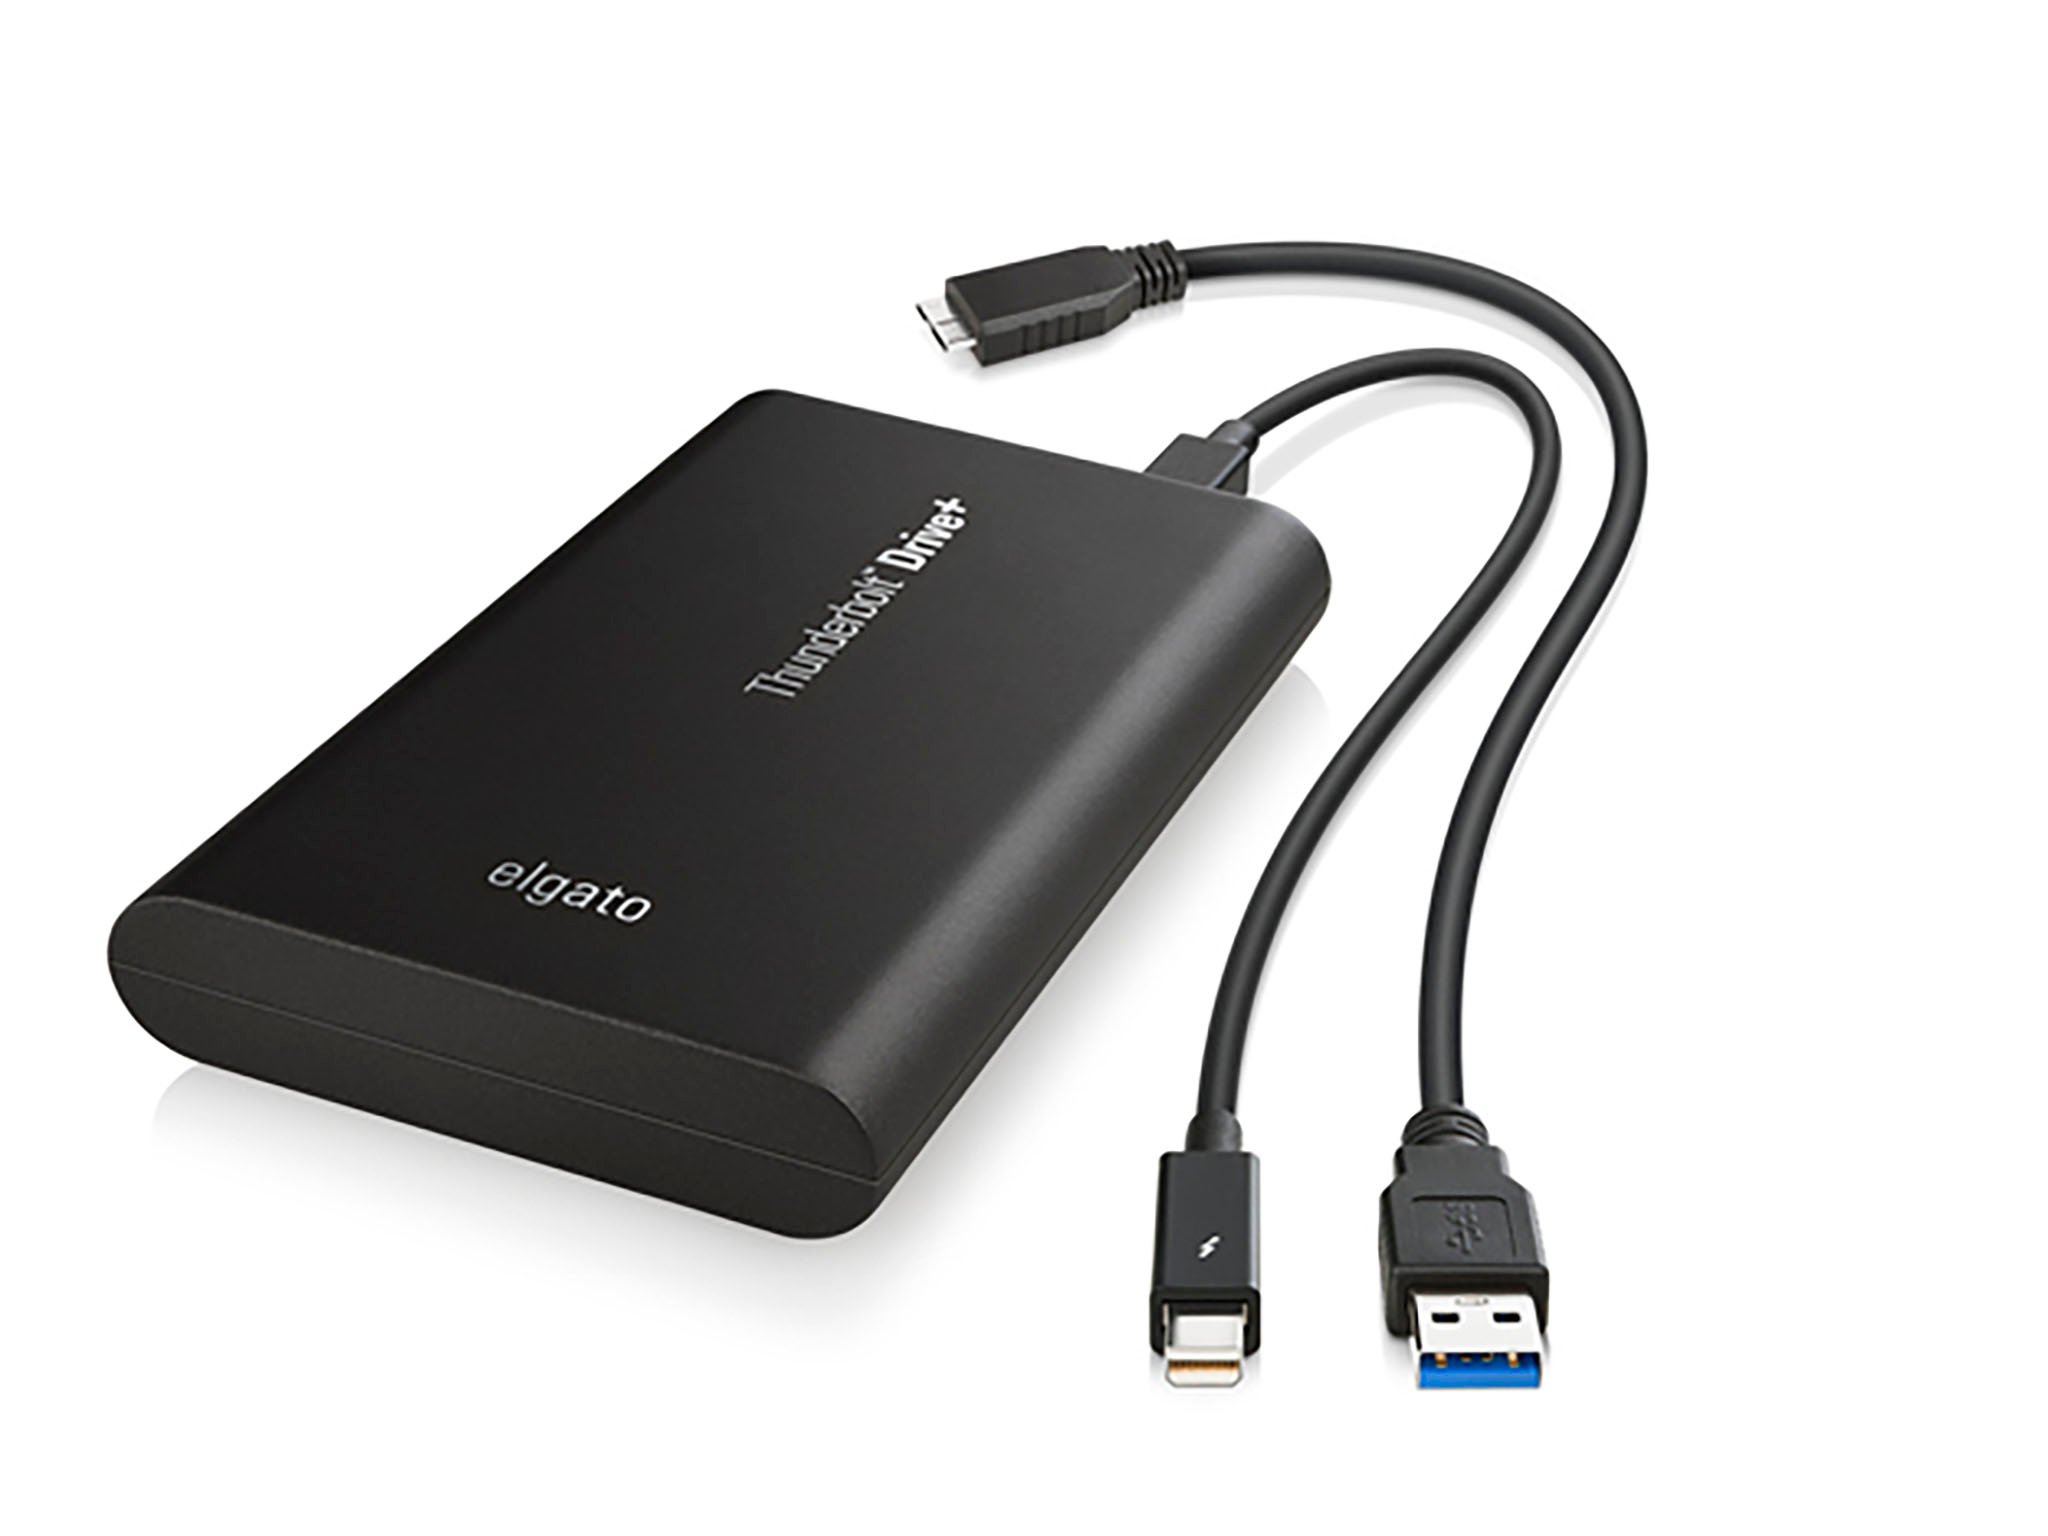 Portable Drive For Mac With Thunderbolt